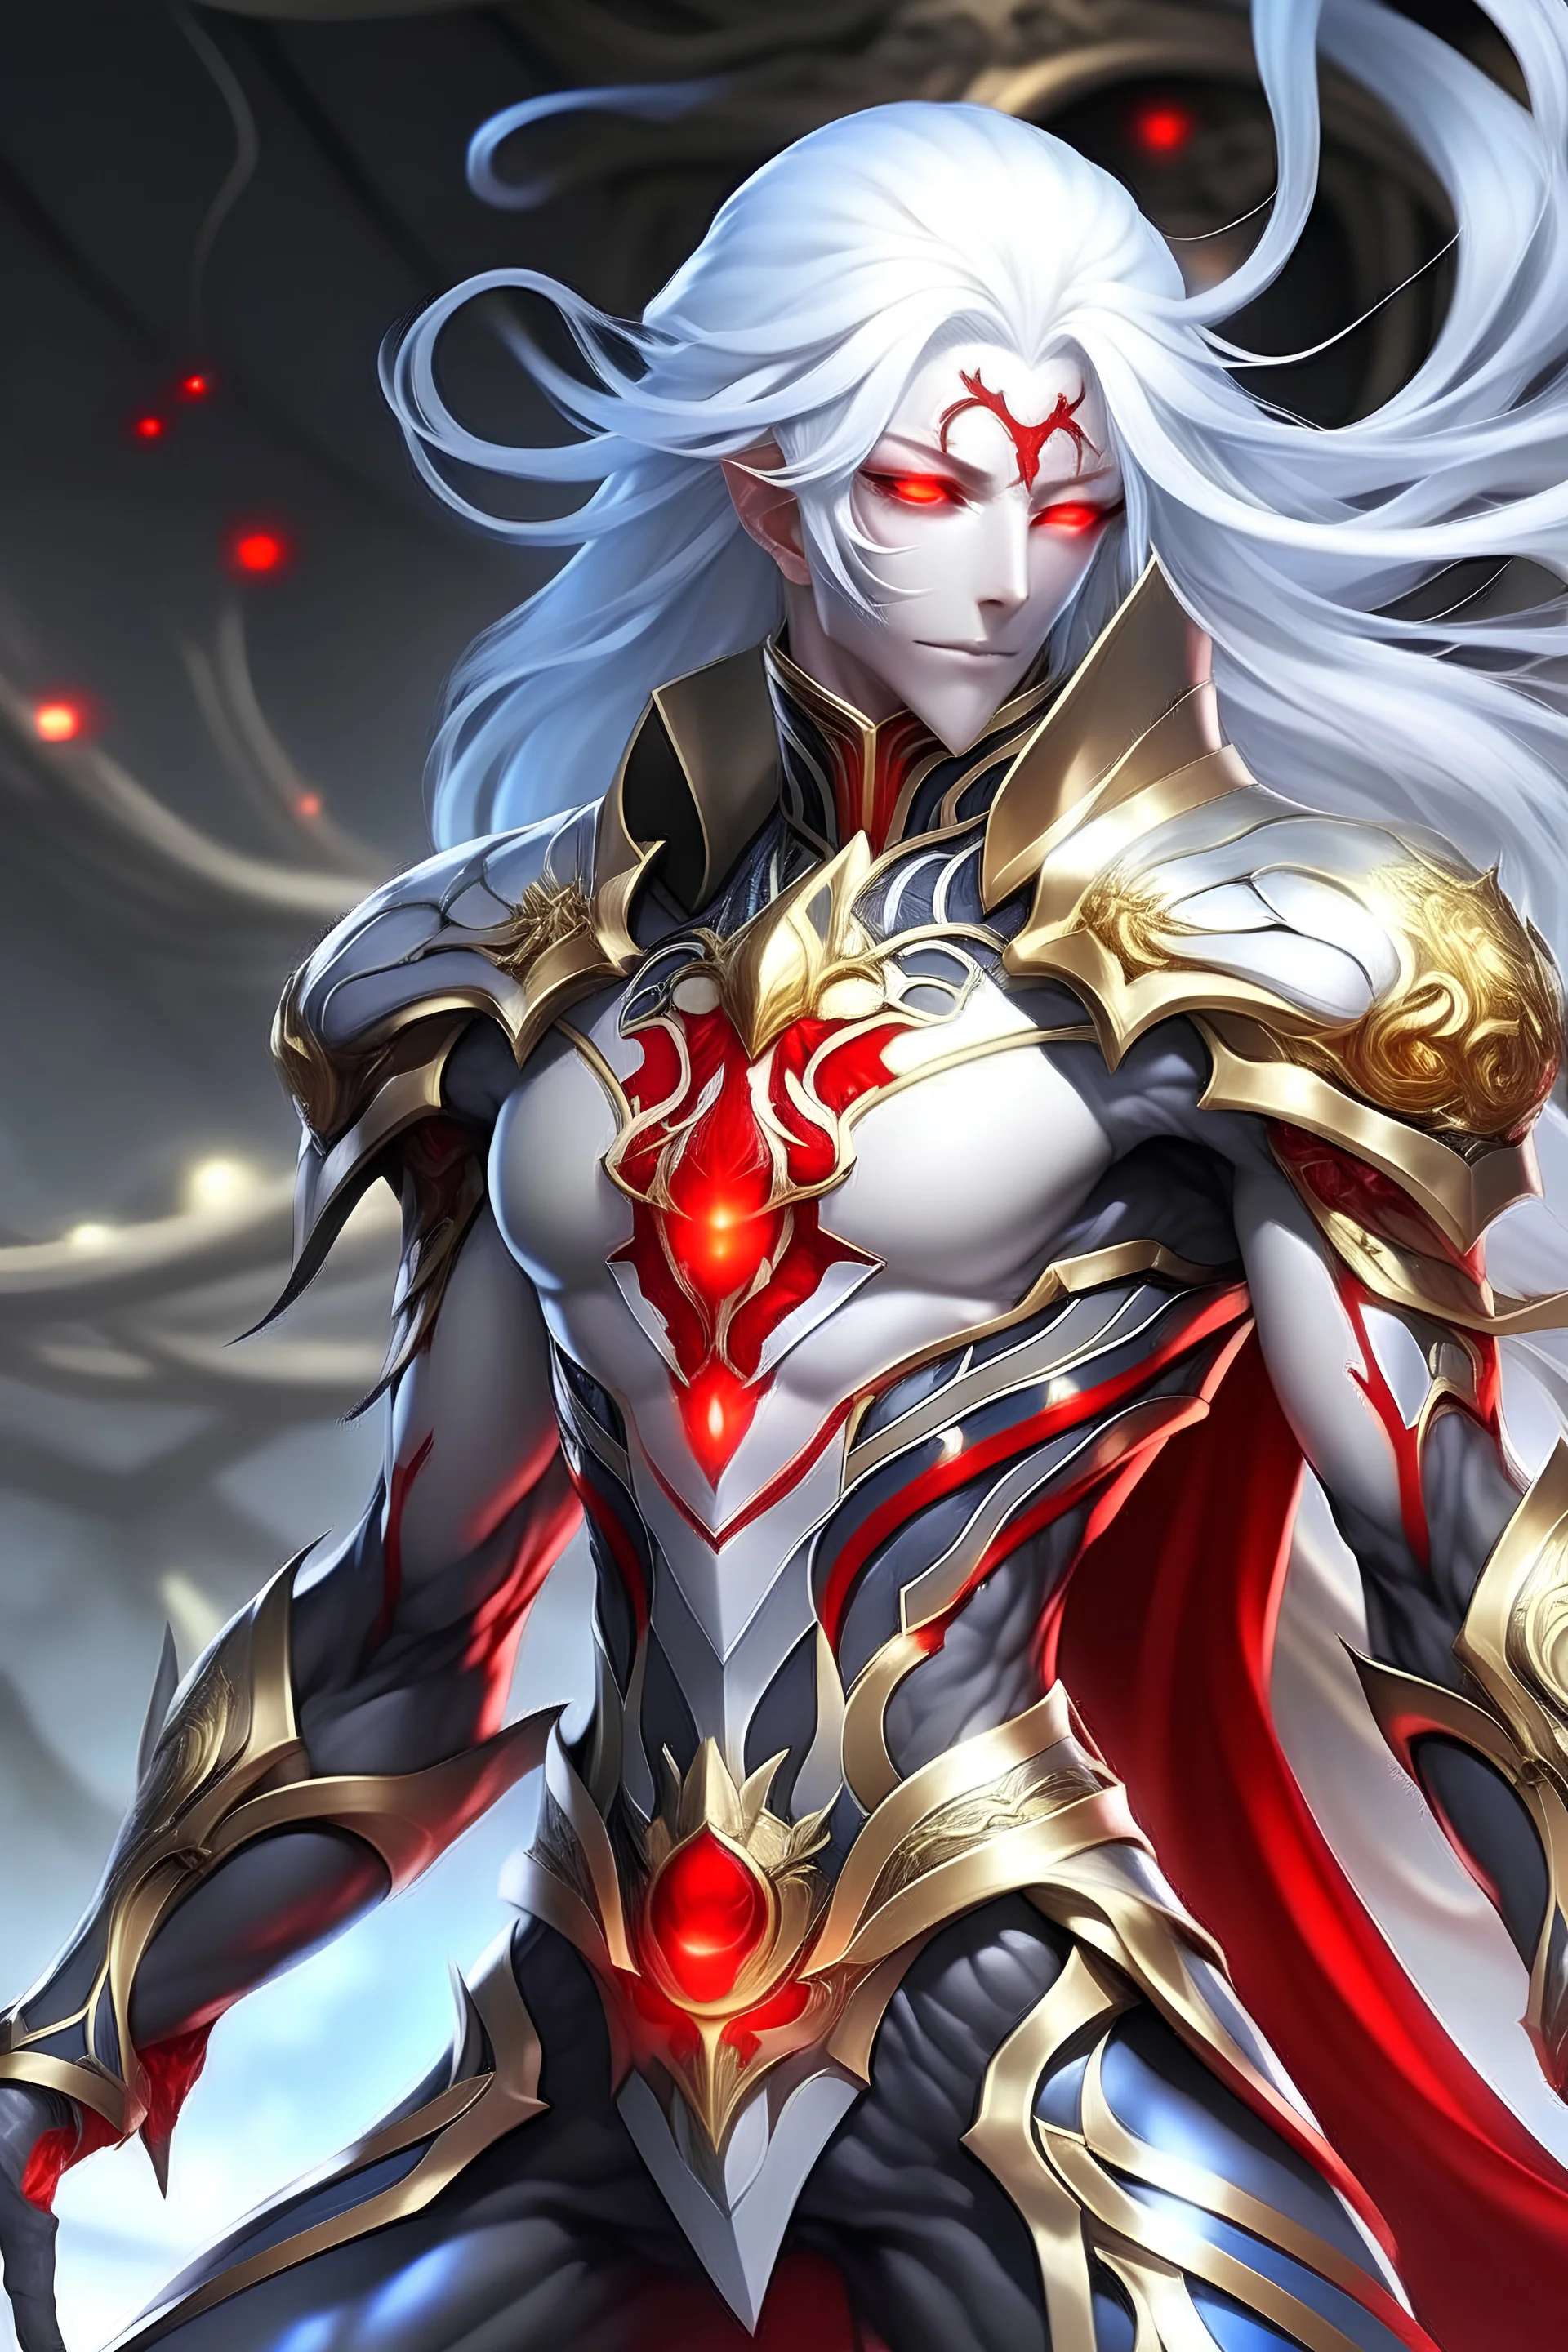 An alien with An all red skin, shining white hair ,white eye and black and gold costume with a normal muscular build capable of taijutsu by artist "anime", Anime Key Visual, Japanese Manga, Pixiv, Zerochan, Anime art, Fantia